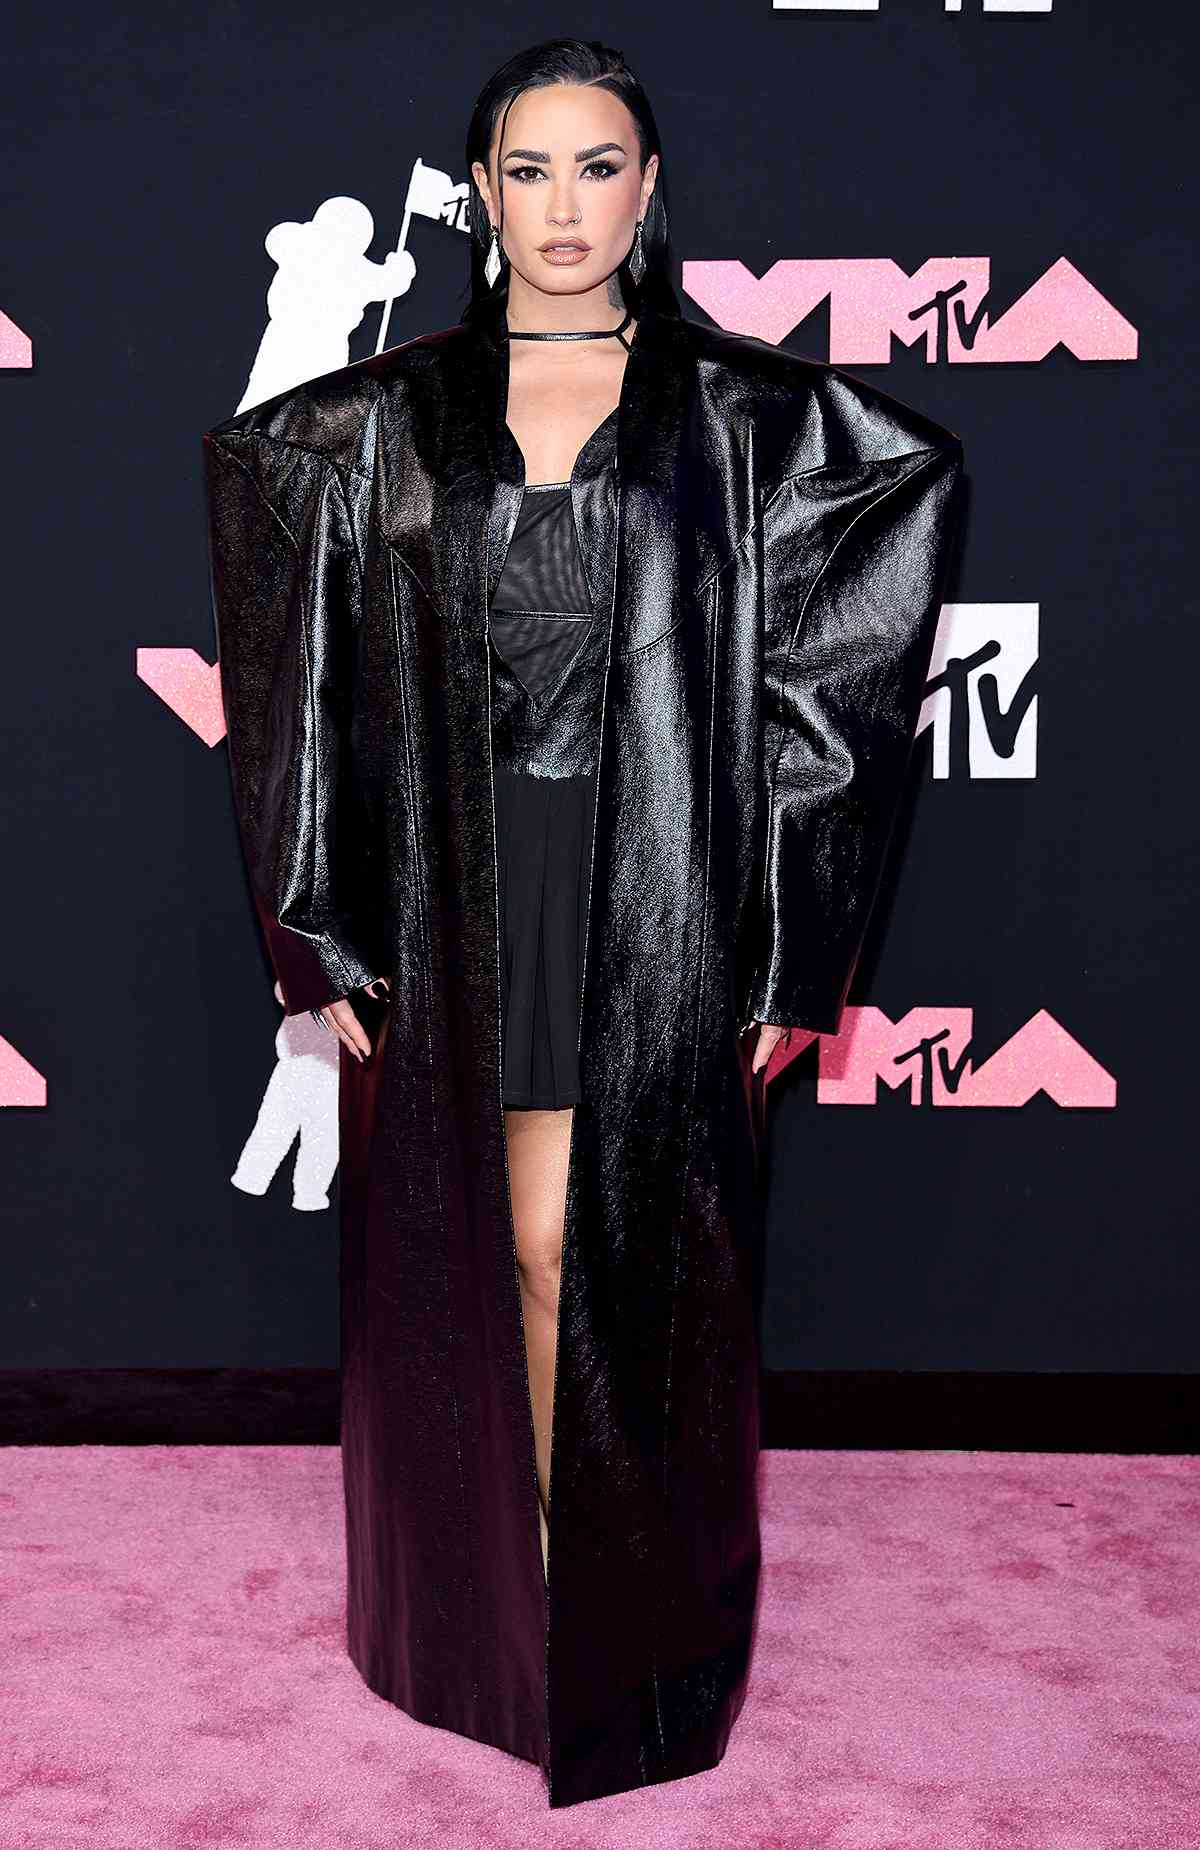 Demi Lovato attends the 2023 MTV Video Music Awards at the Prudential Center on September 12, 2023 in Newark, New Jersey.